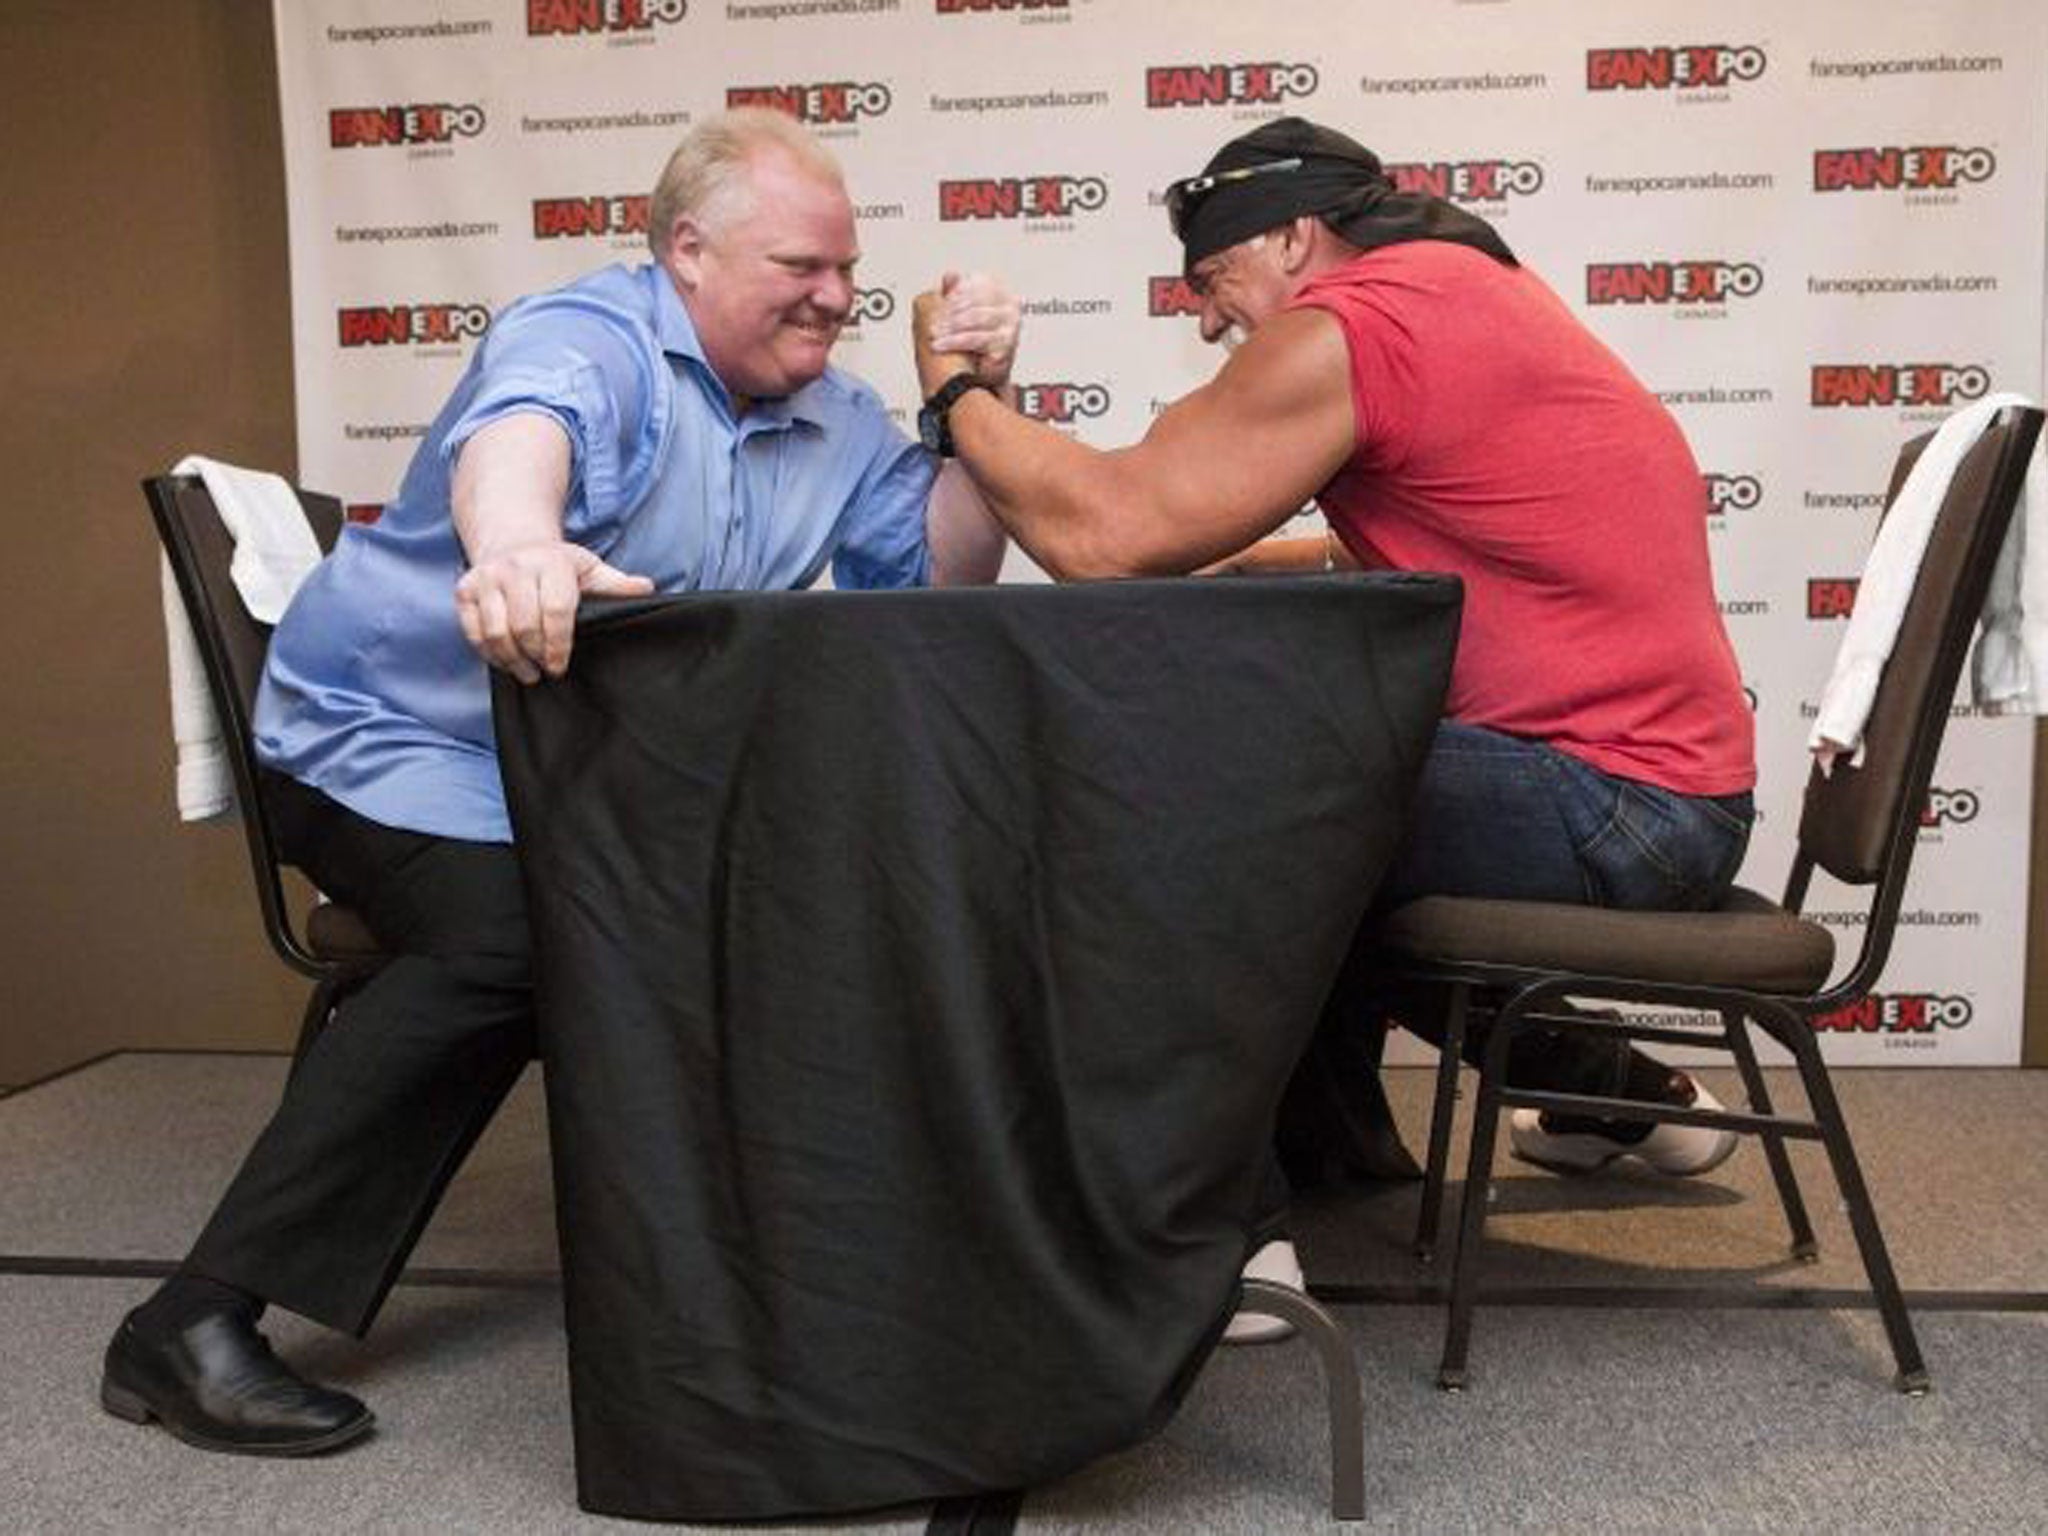 Ford, left, takes on Hulk Hogan in an arm-wrestling match to promote a comic book and videogame convention in Toronto in 2013